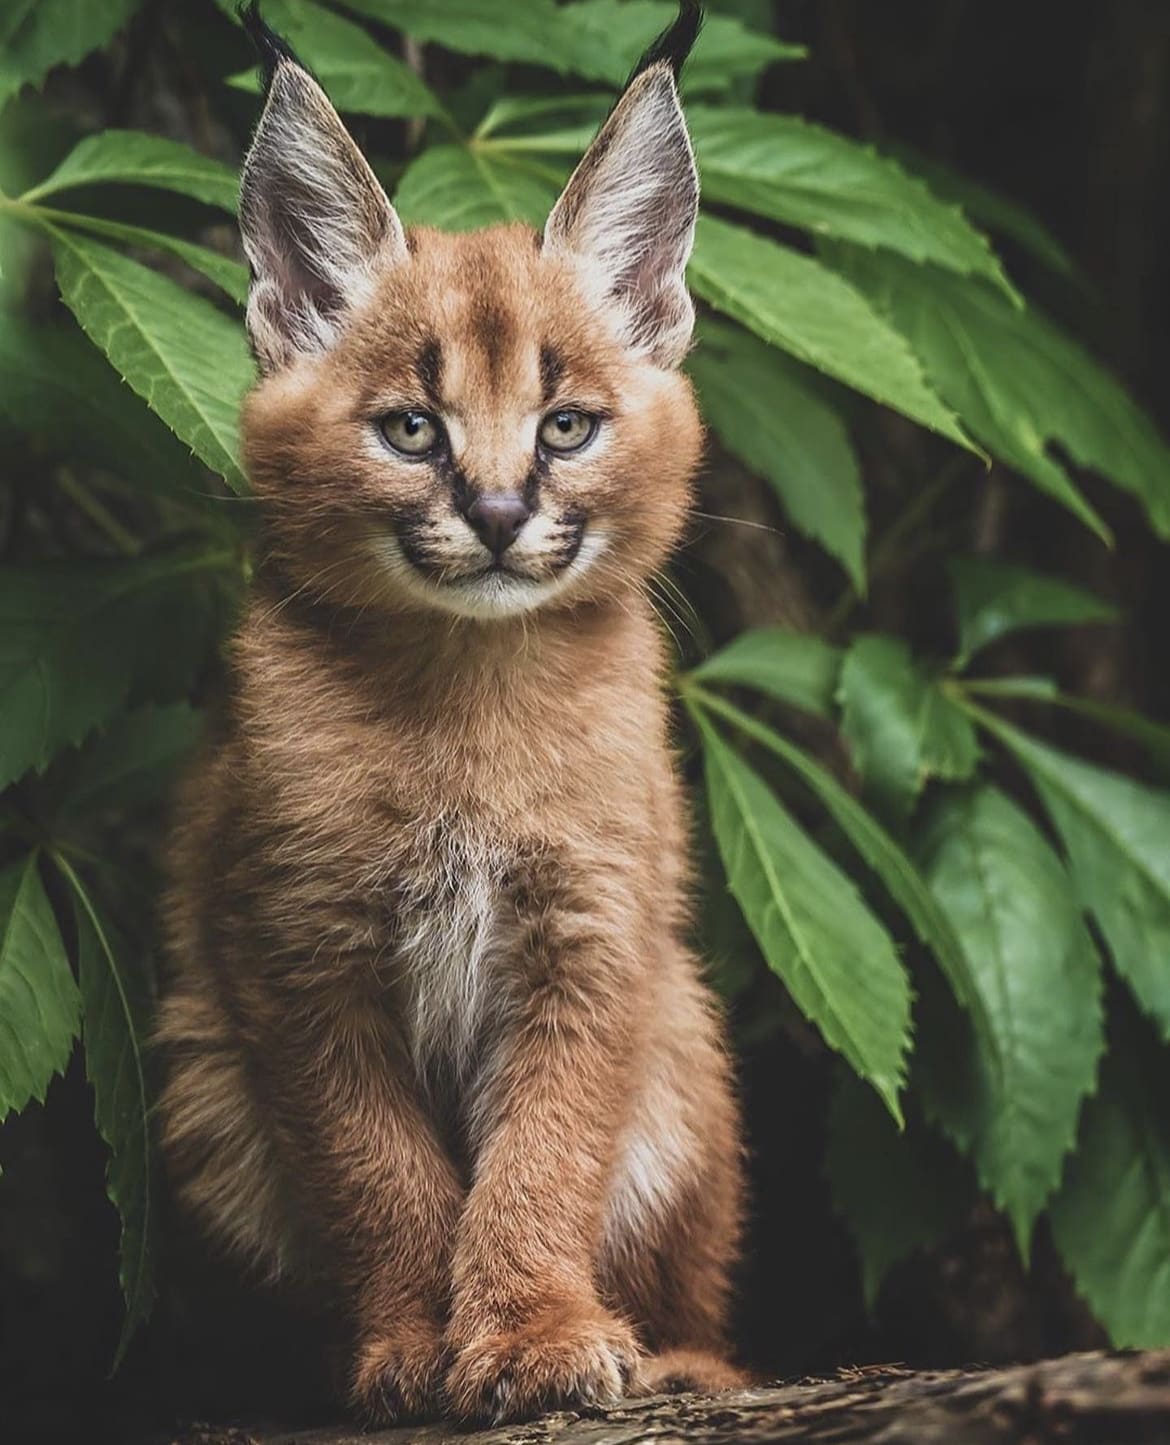 A fluffy, young caracal cub